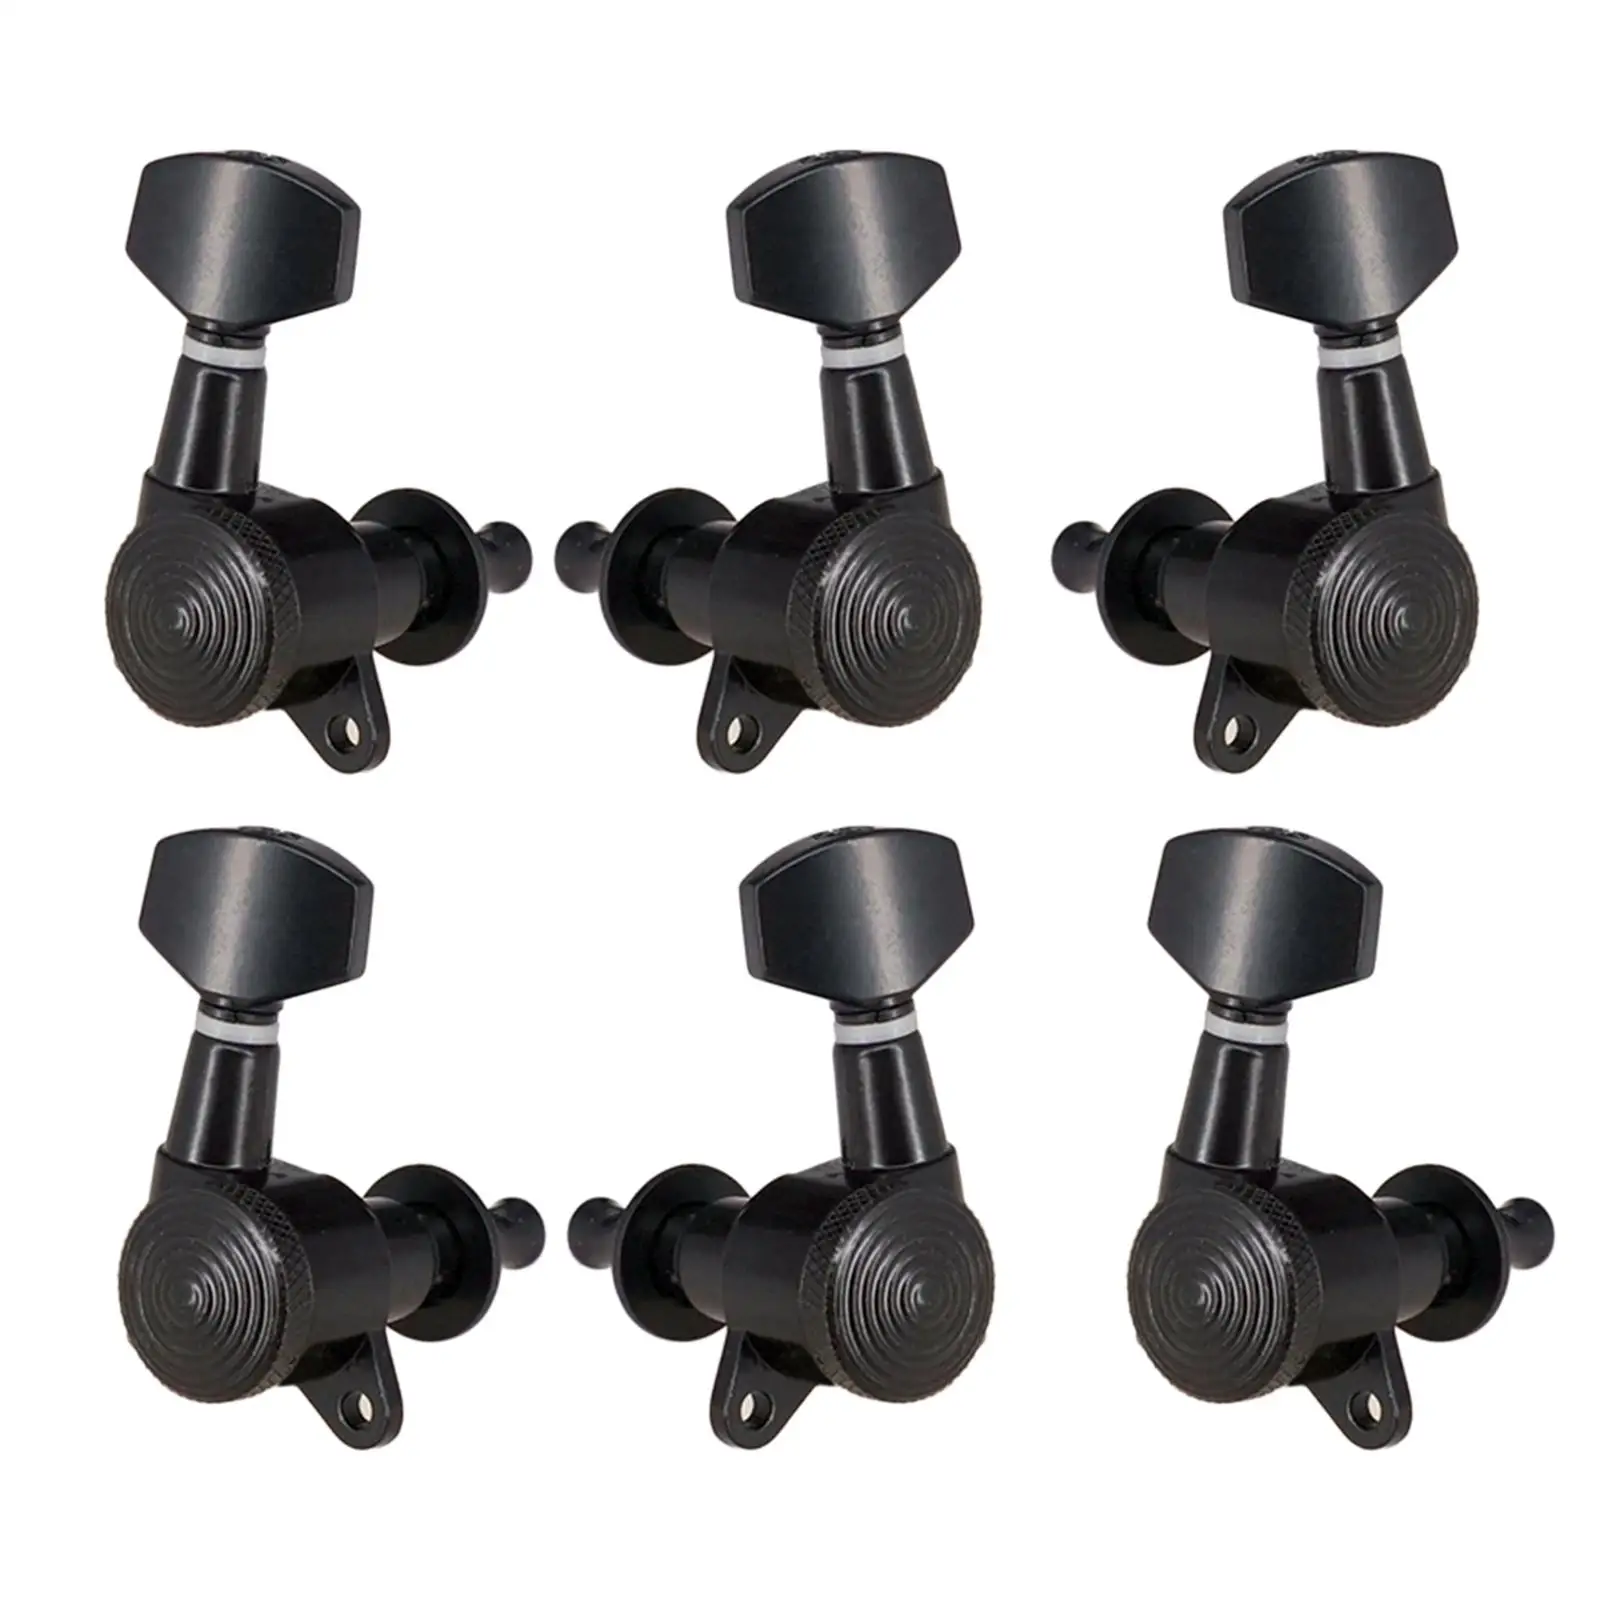 6Pack of Guitar String Peg Locking Tuners Tuning Pegs Guitar for Machine Head Guitar Parts & Accessories